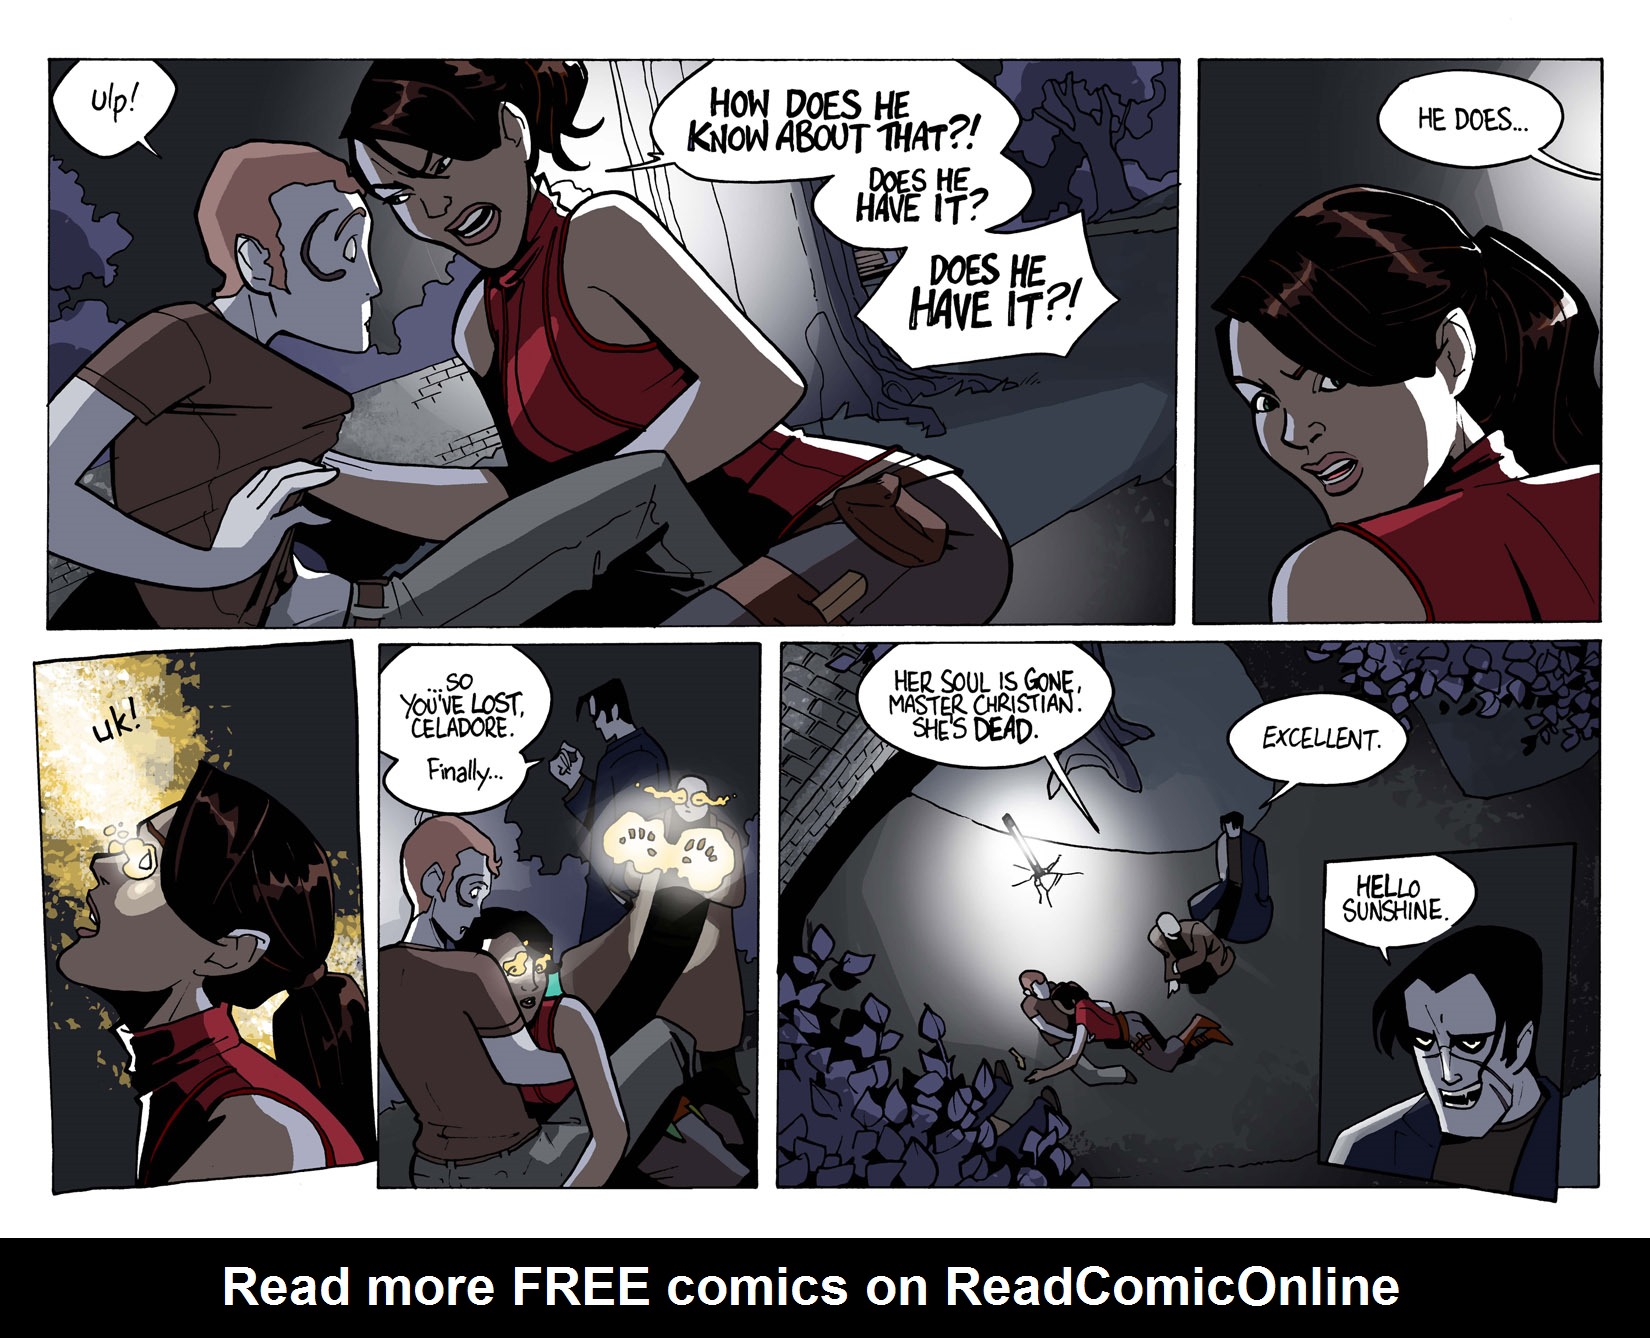 Read online Celadore comic -  Issue #1 - 4